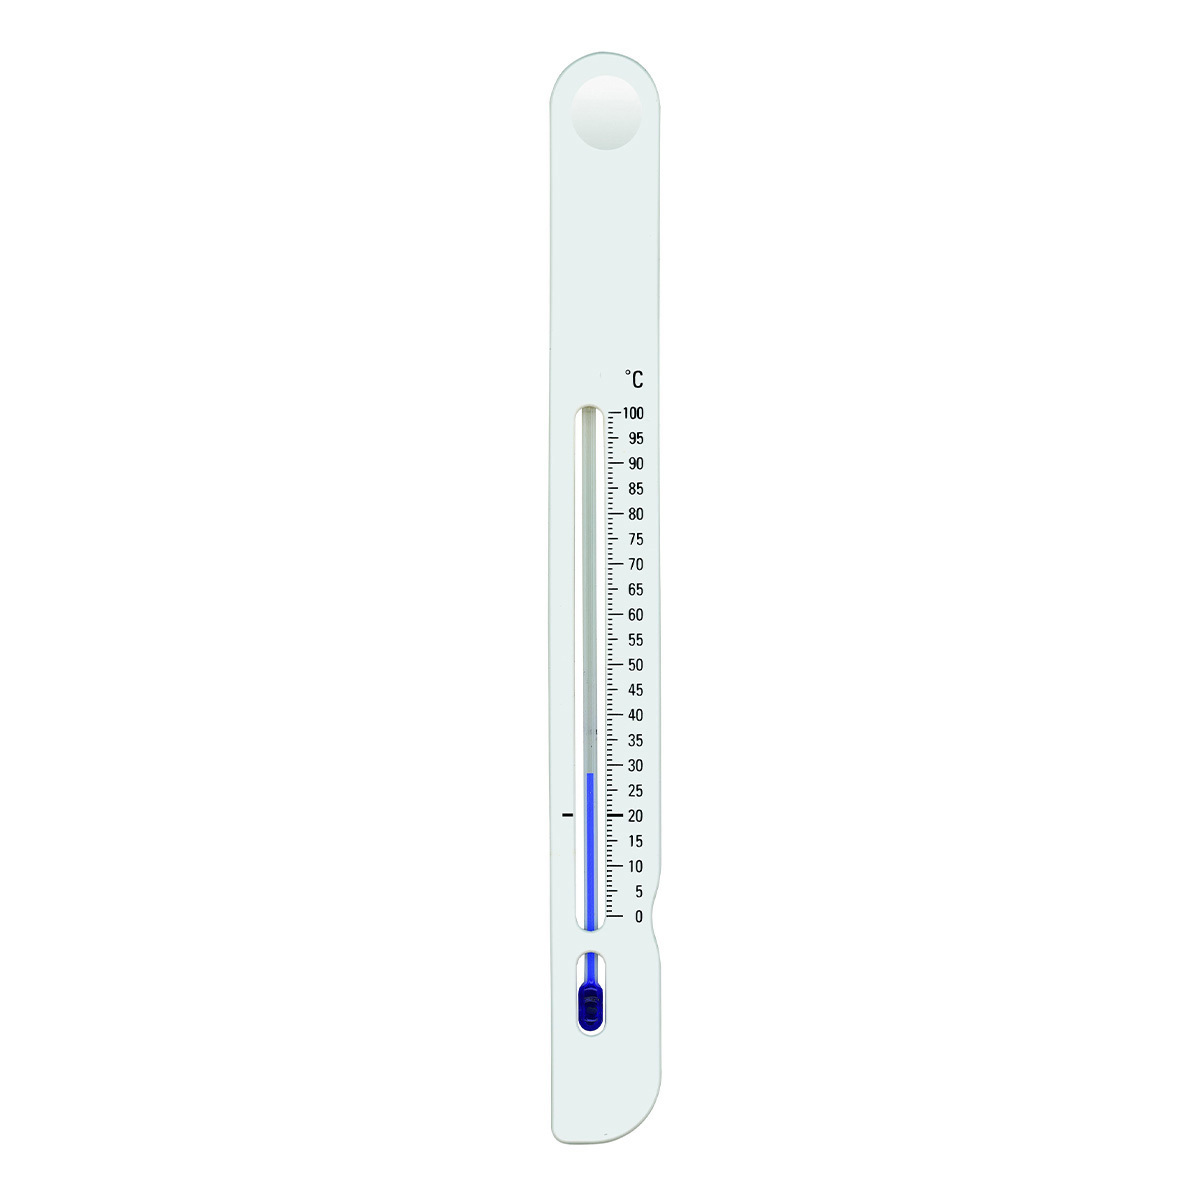 14-1019-analoges-joghurt-thermometer-1200x1200px.jpg